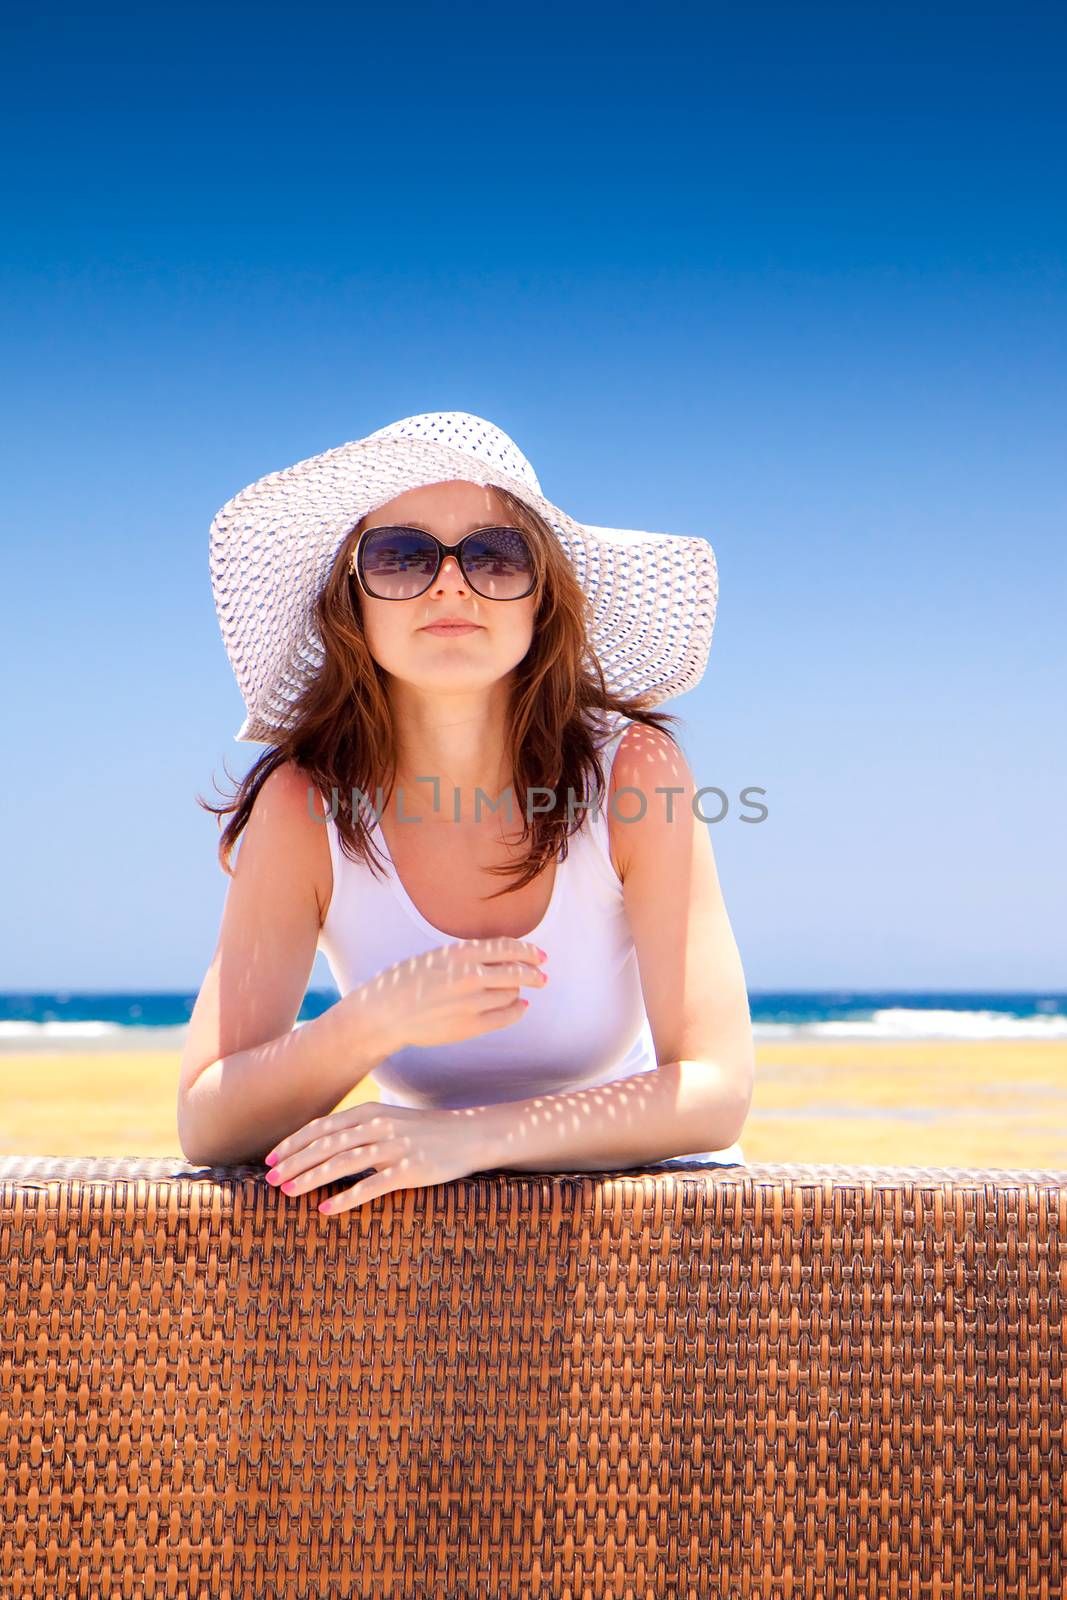 The young beautiful woman in a hat on vacation, on a sunny beach